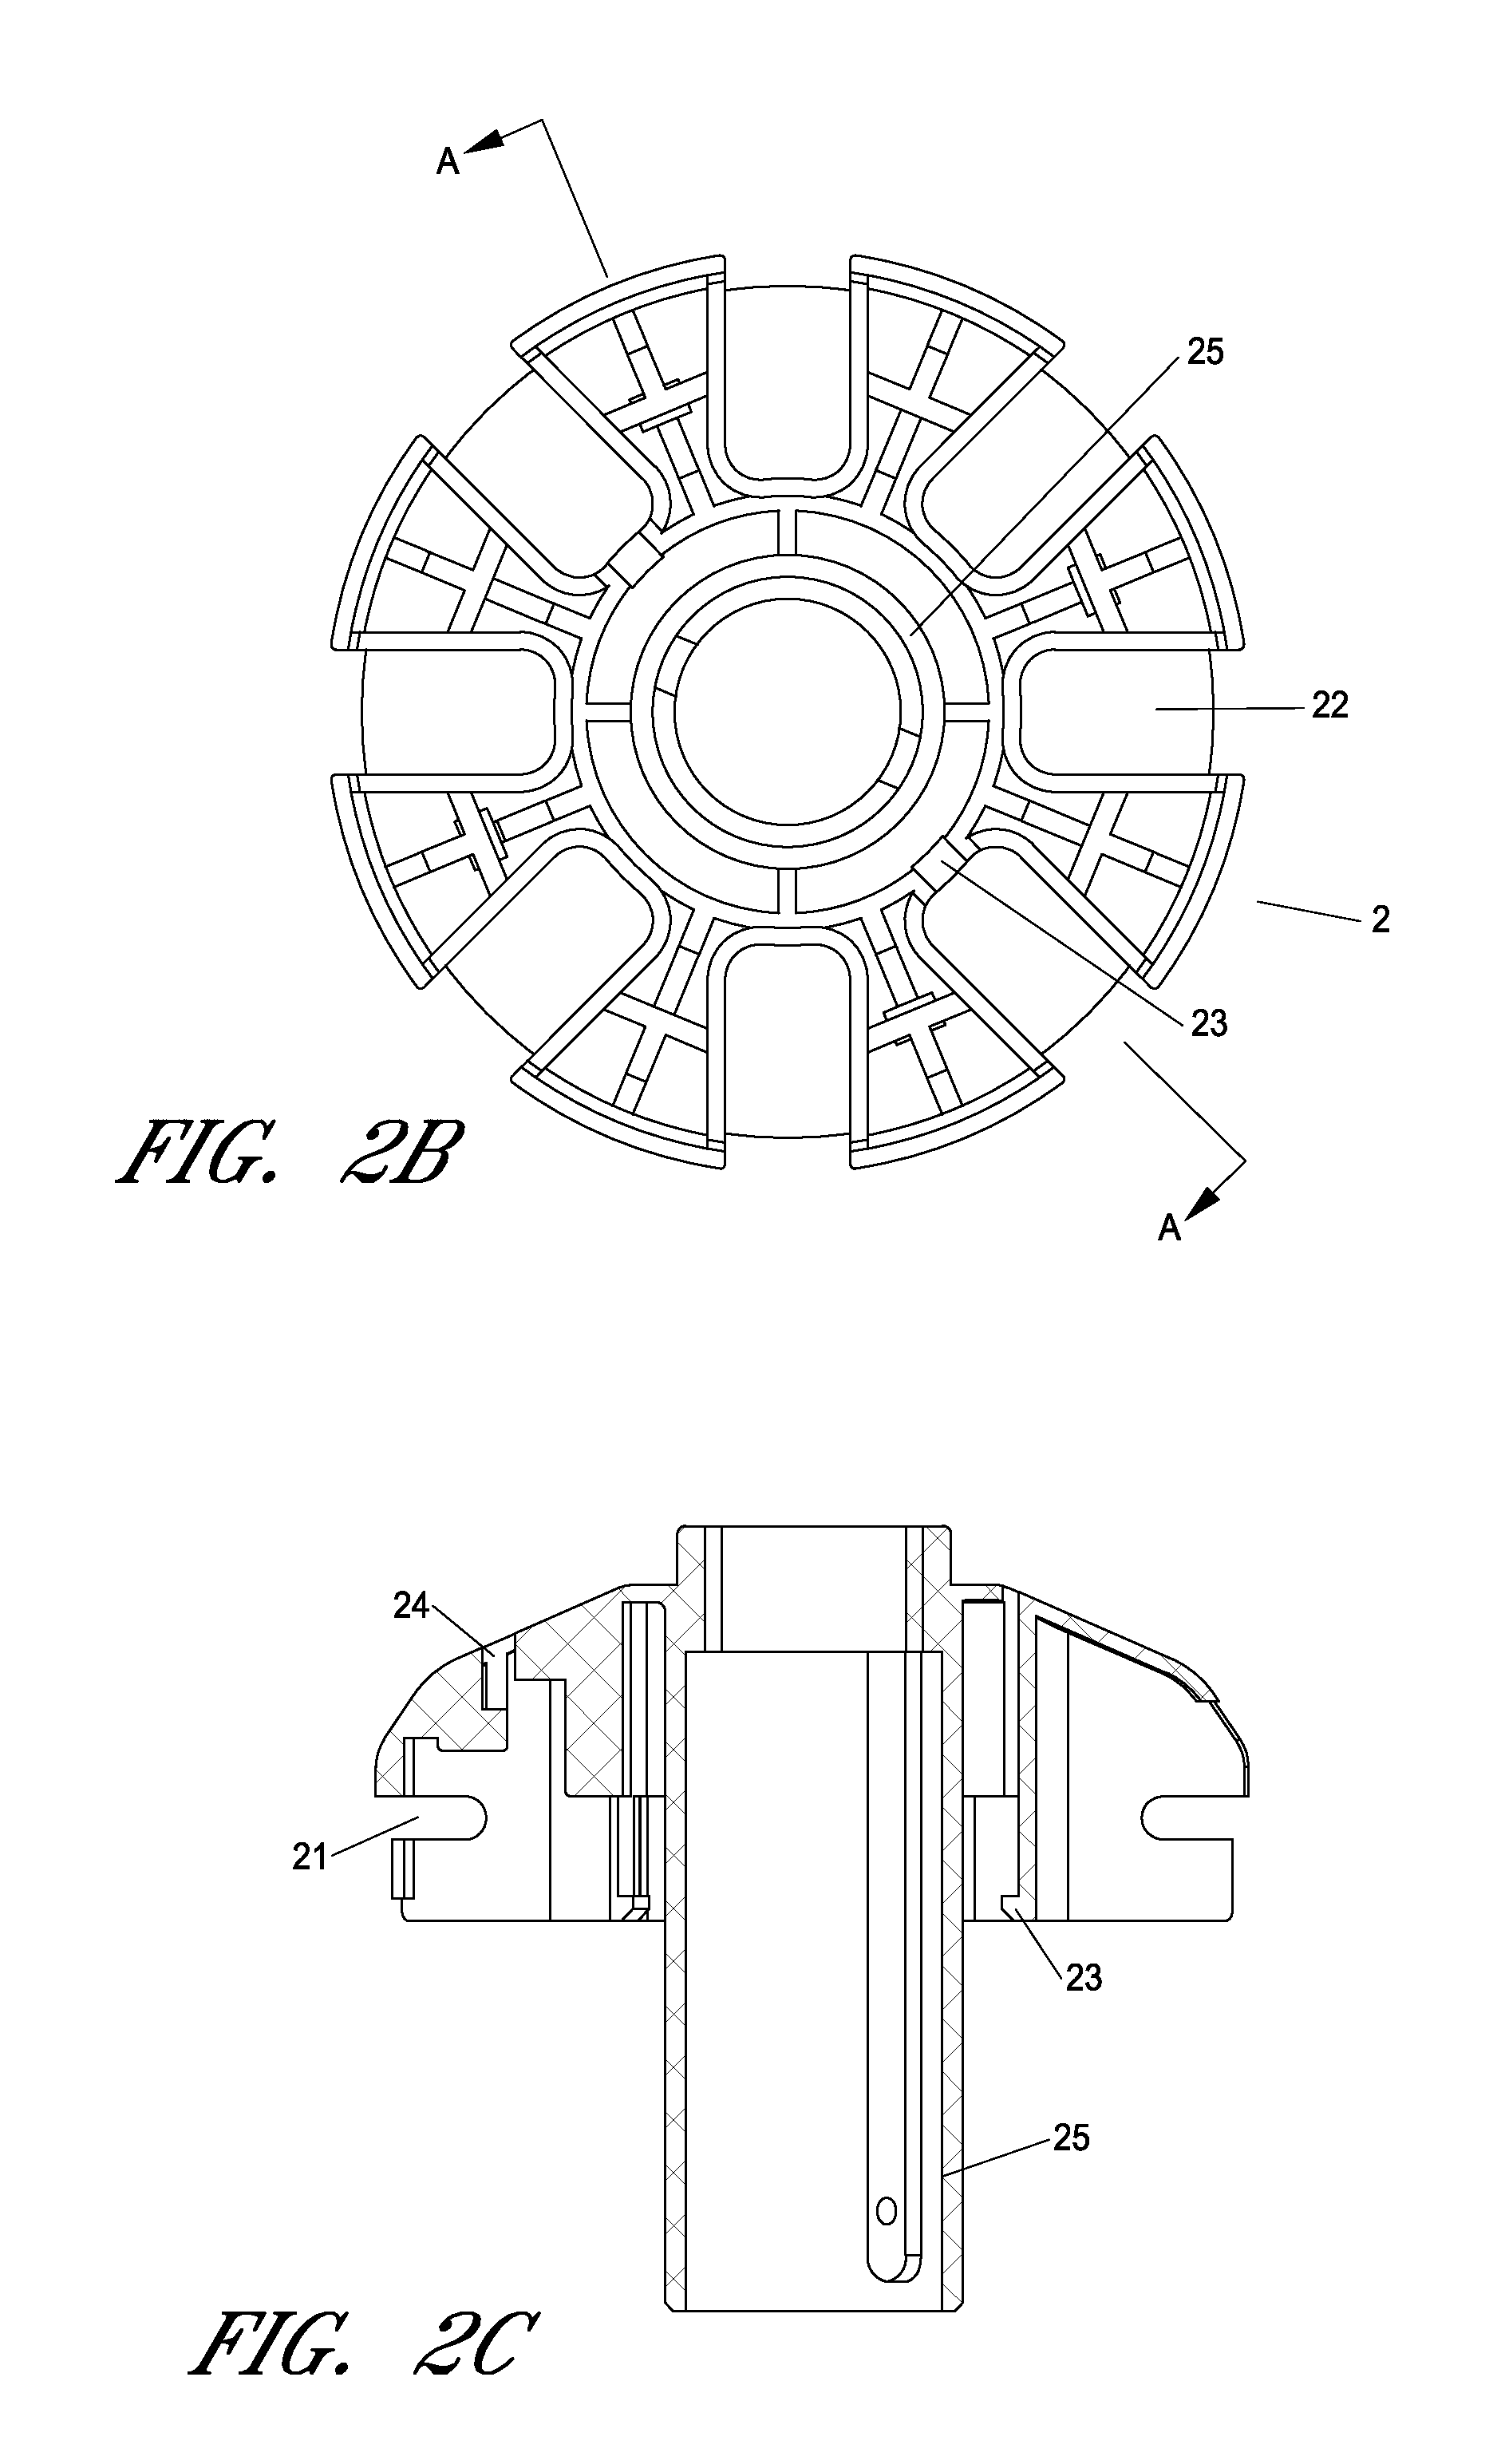 Umbrella quick frame assembly systems and methods